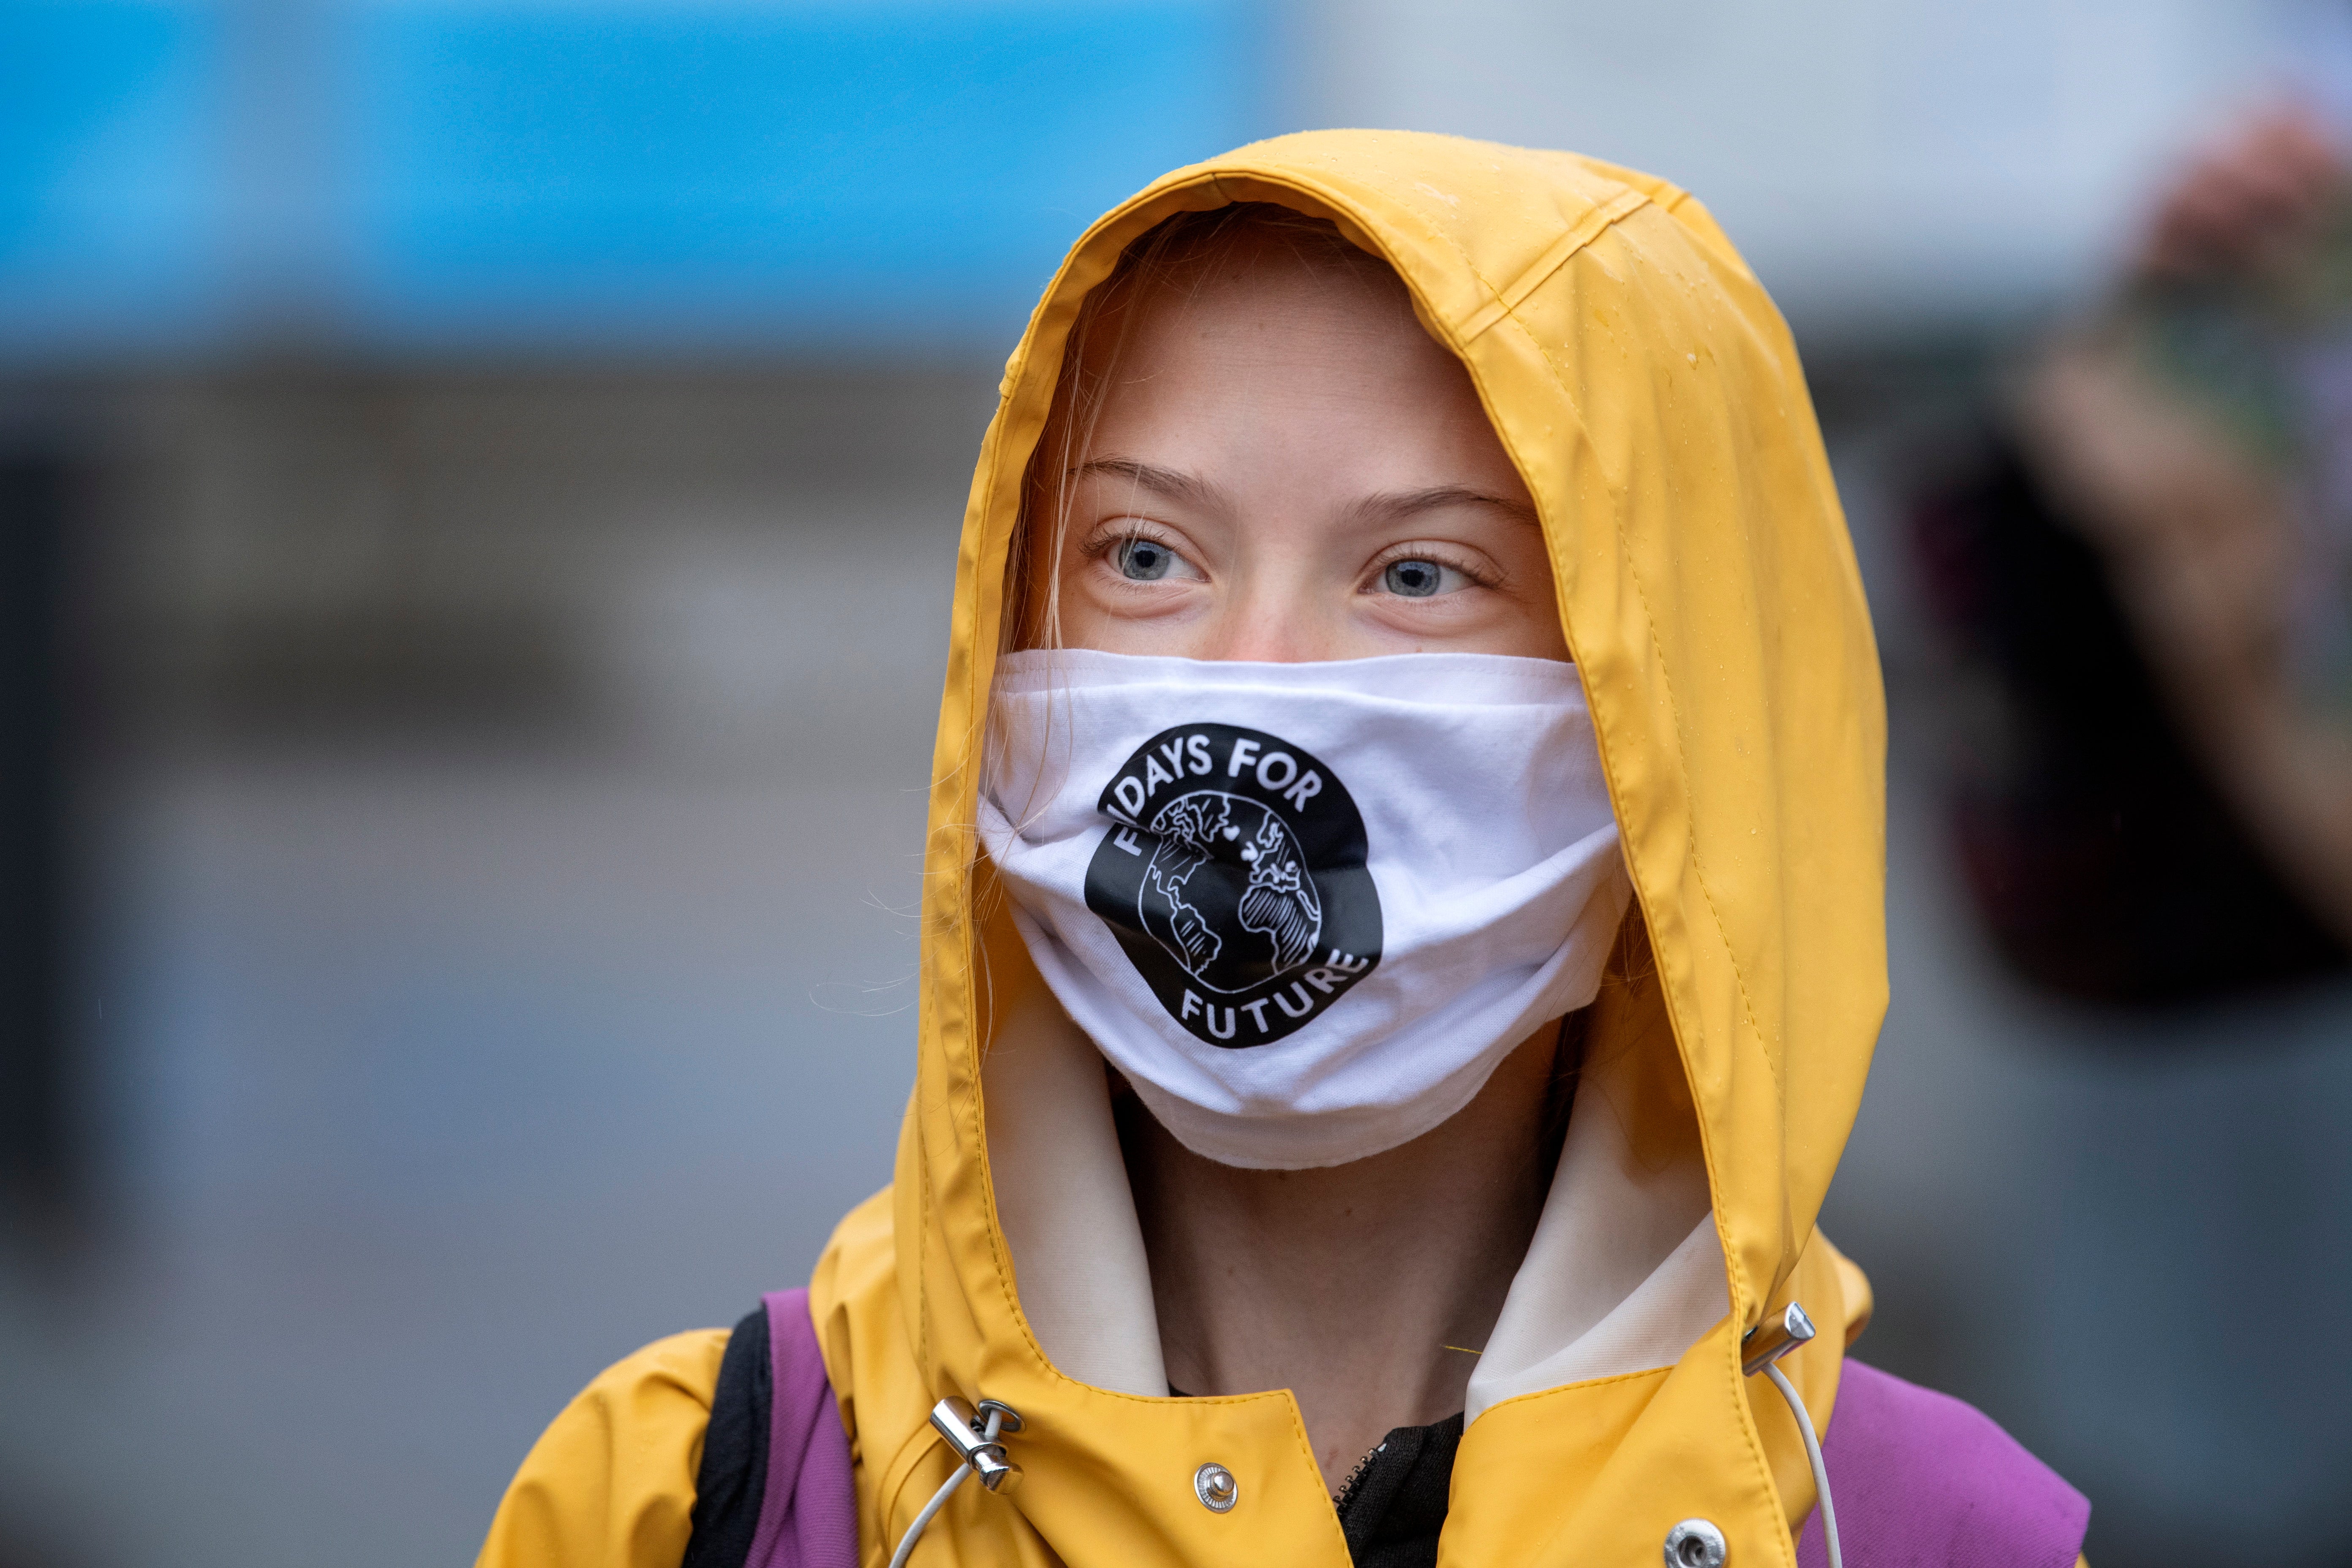 Greta Thunberg appears not to be impressed by New Zealand’s climate policies